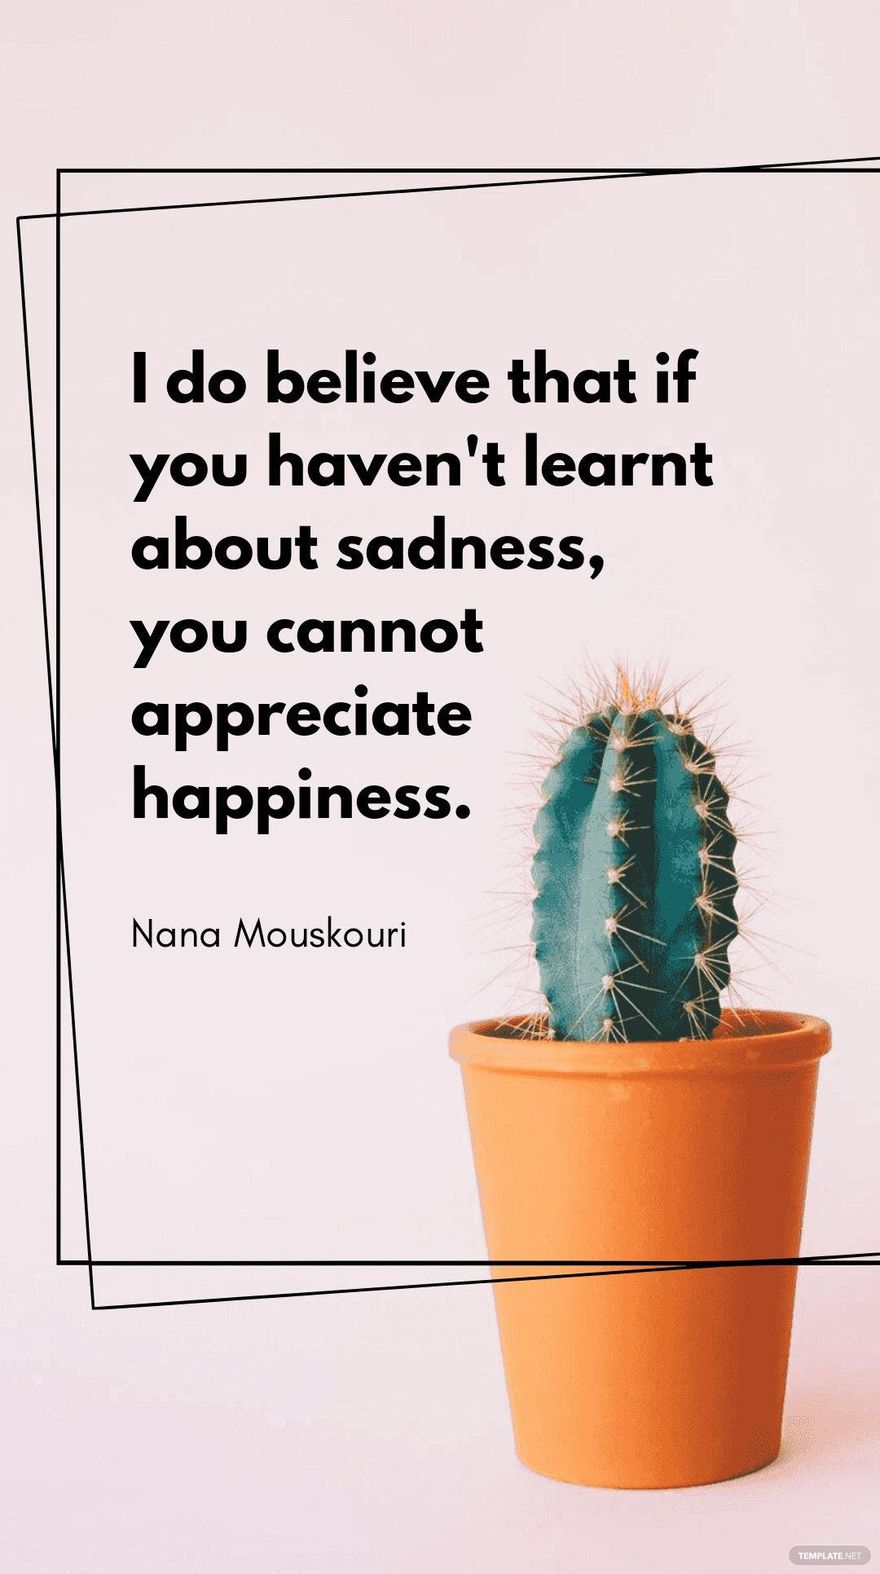 Nana Mouskouri - I do believe that if you haven't learnt about sadness, you cannot appreciate happiness.